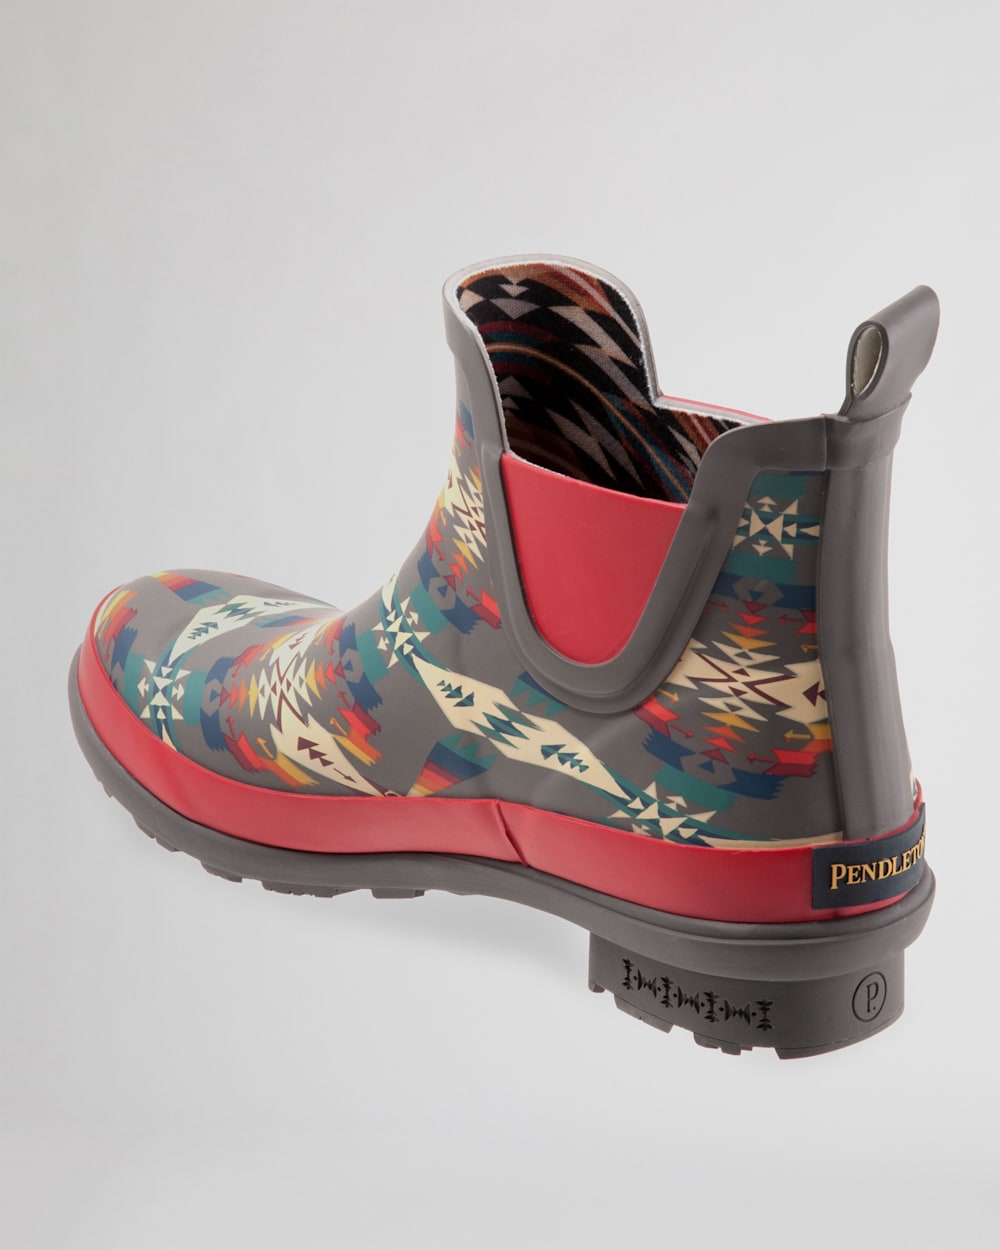 ALTERNATE VIEW OF WOMEN'S TUCSON CHELSEA RAIN BOOTS IN GREY image number 2